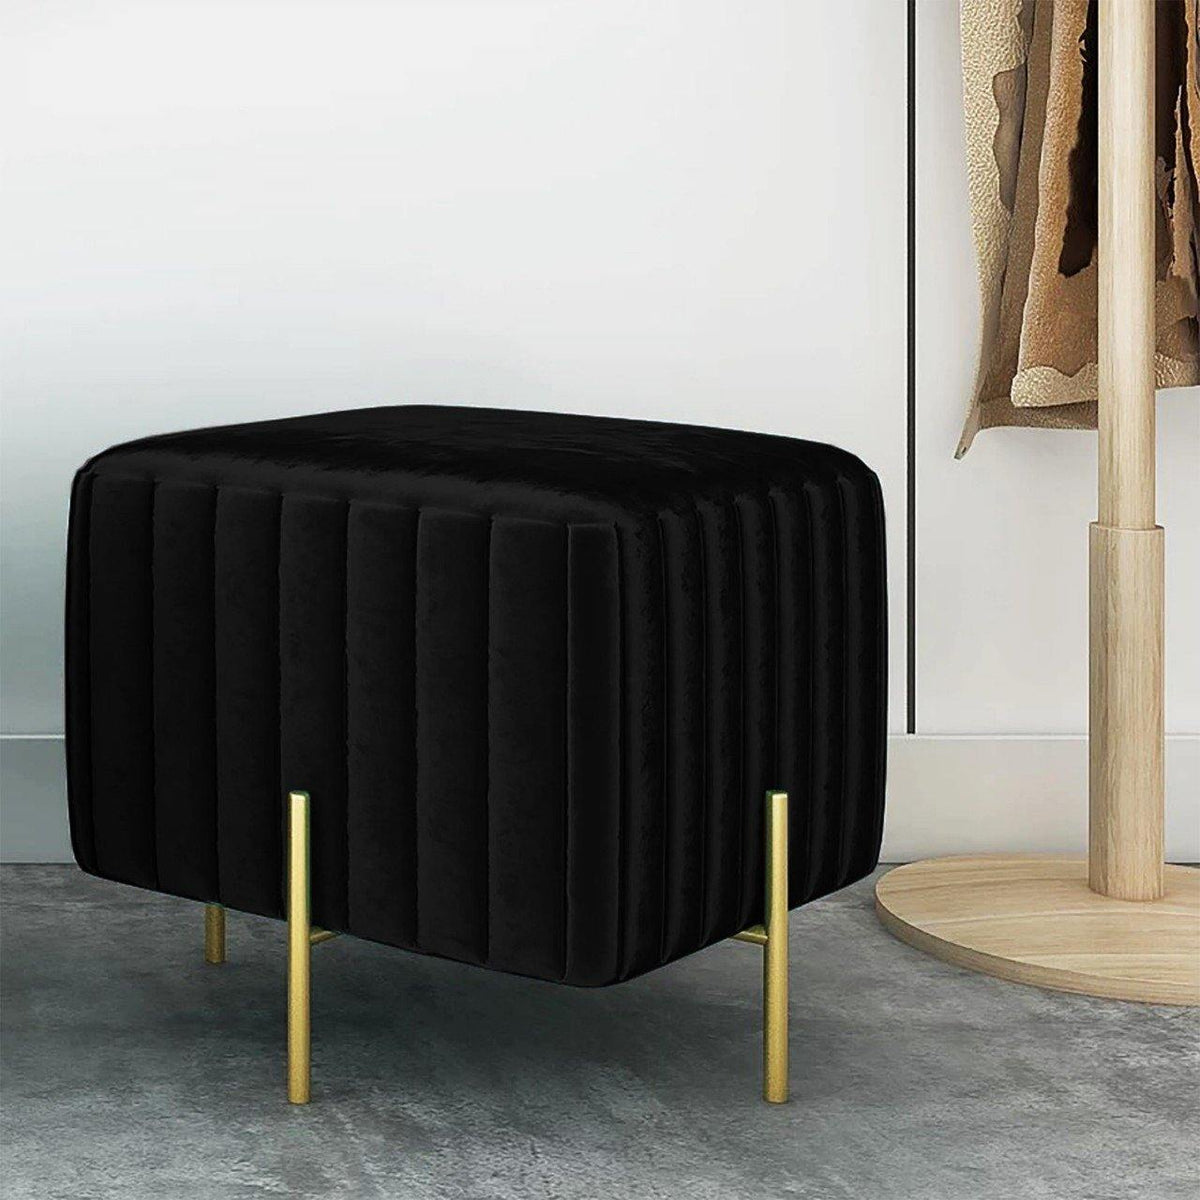 Wooden Square stool With Golden Metal Stand (Black)